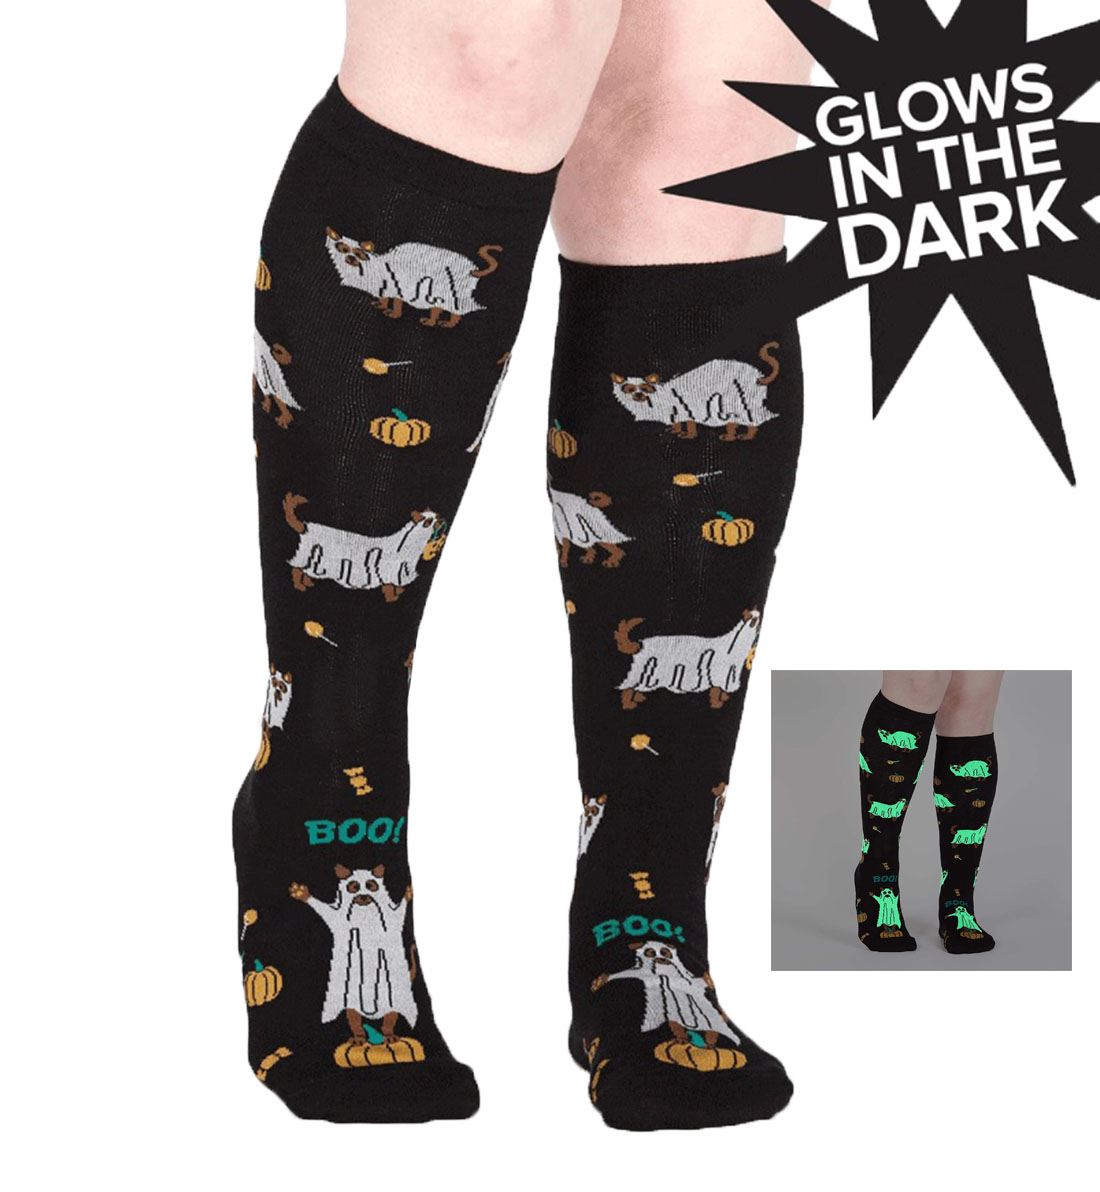 SOCK it to me Unisex Knee High Socks (f0445),Trick Or Treat - Trick Or Treat,One Size